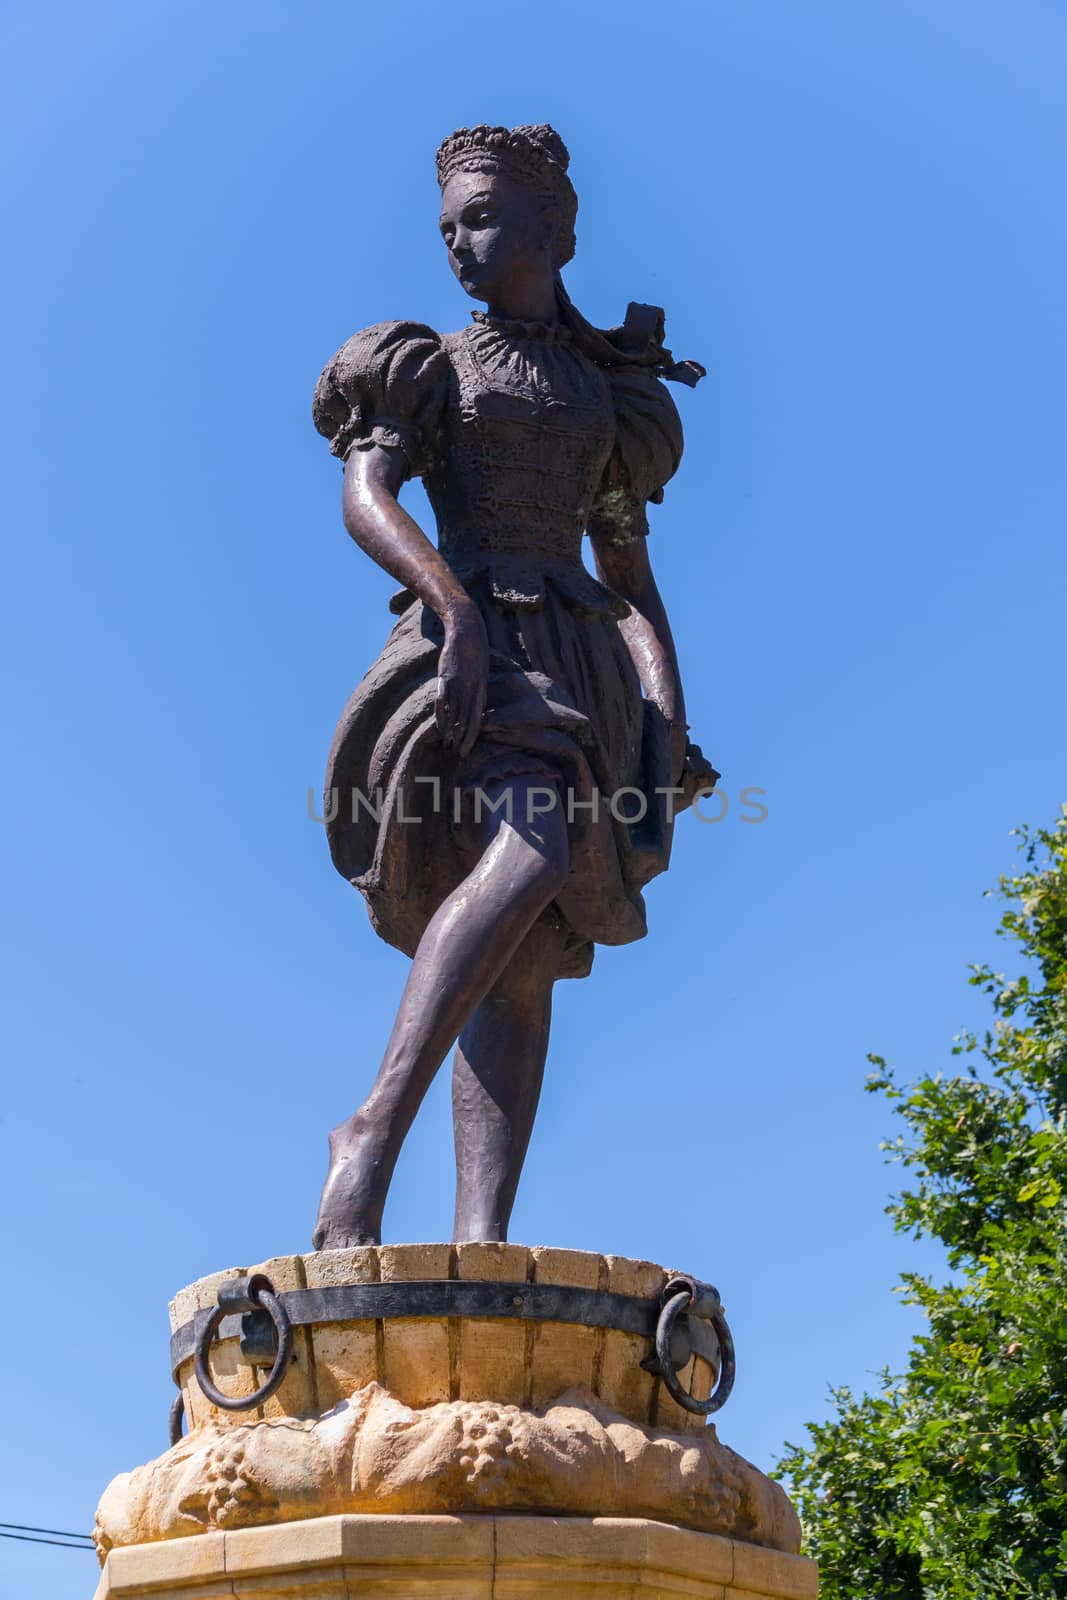 Bronze statue of a girl pressing grapes in a wooden bucket by Adamchuk